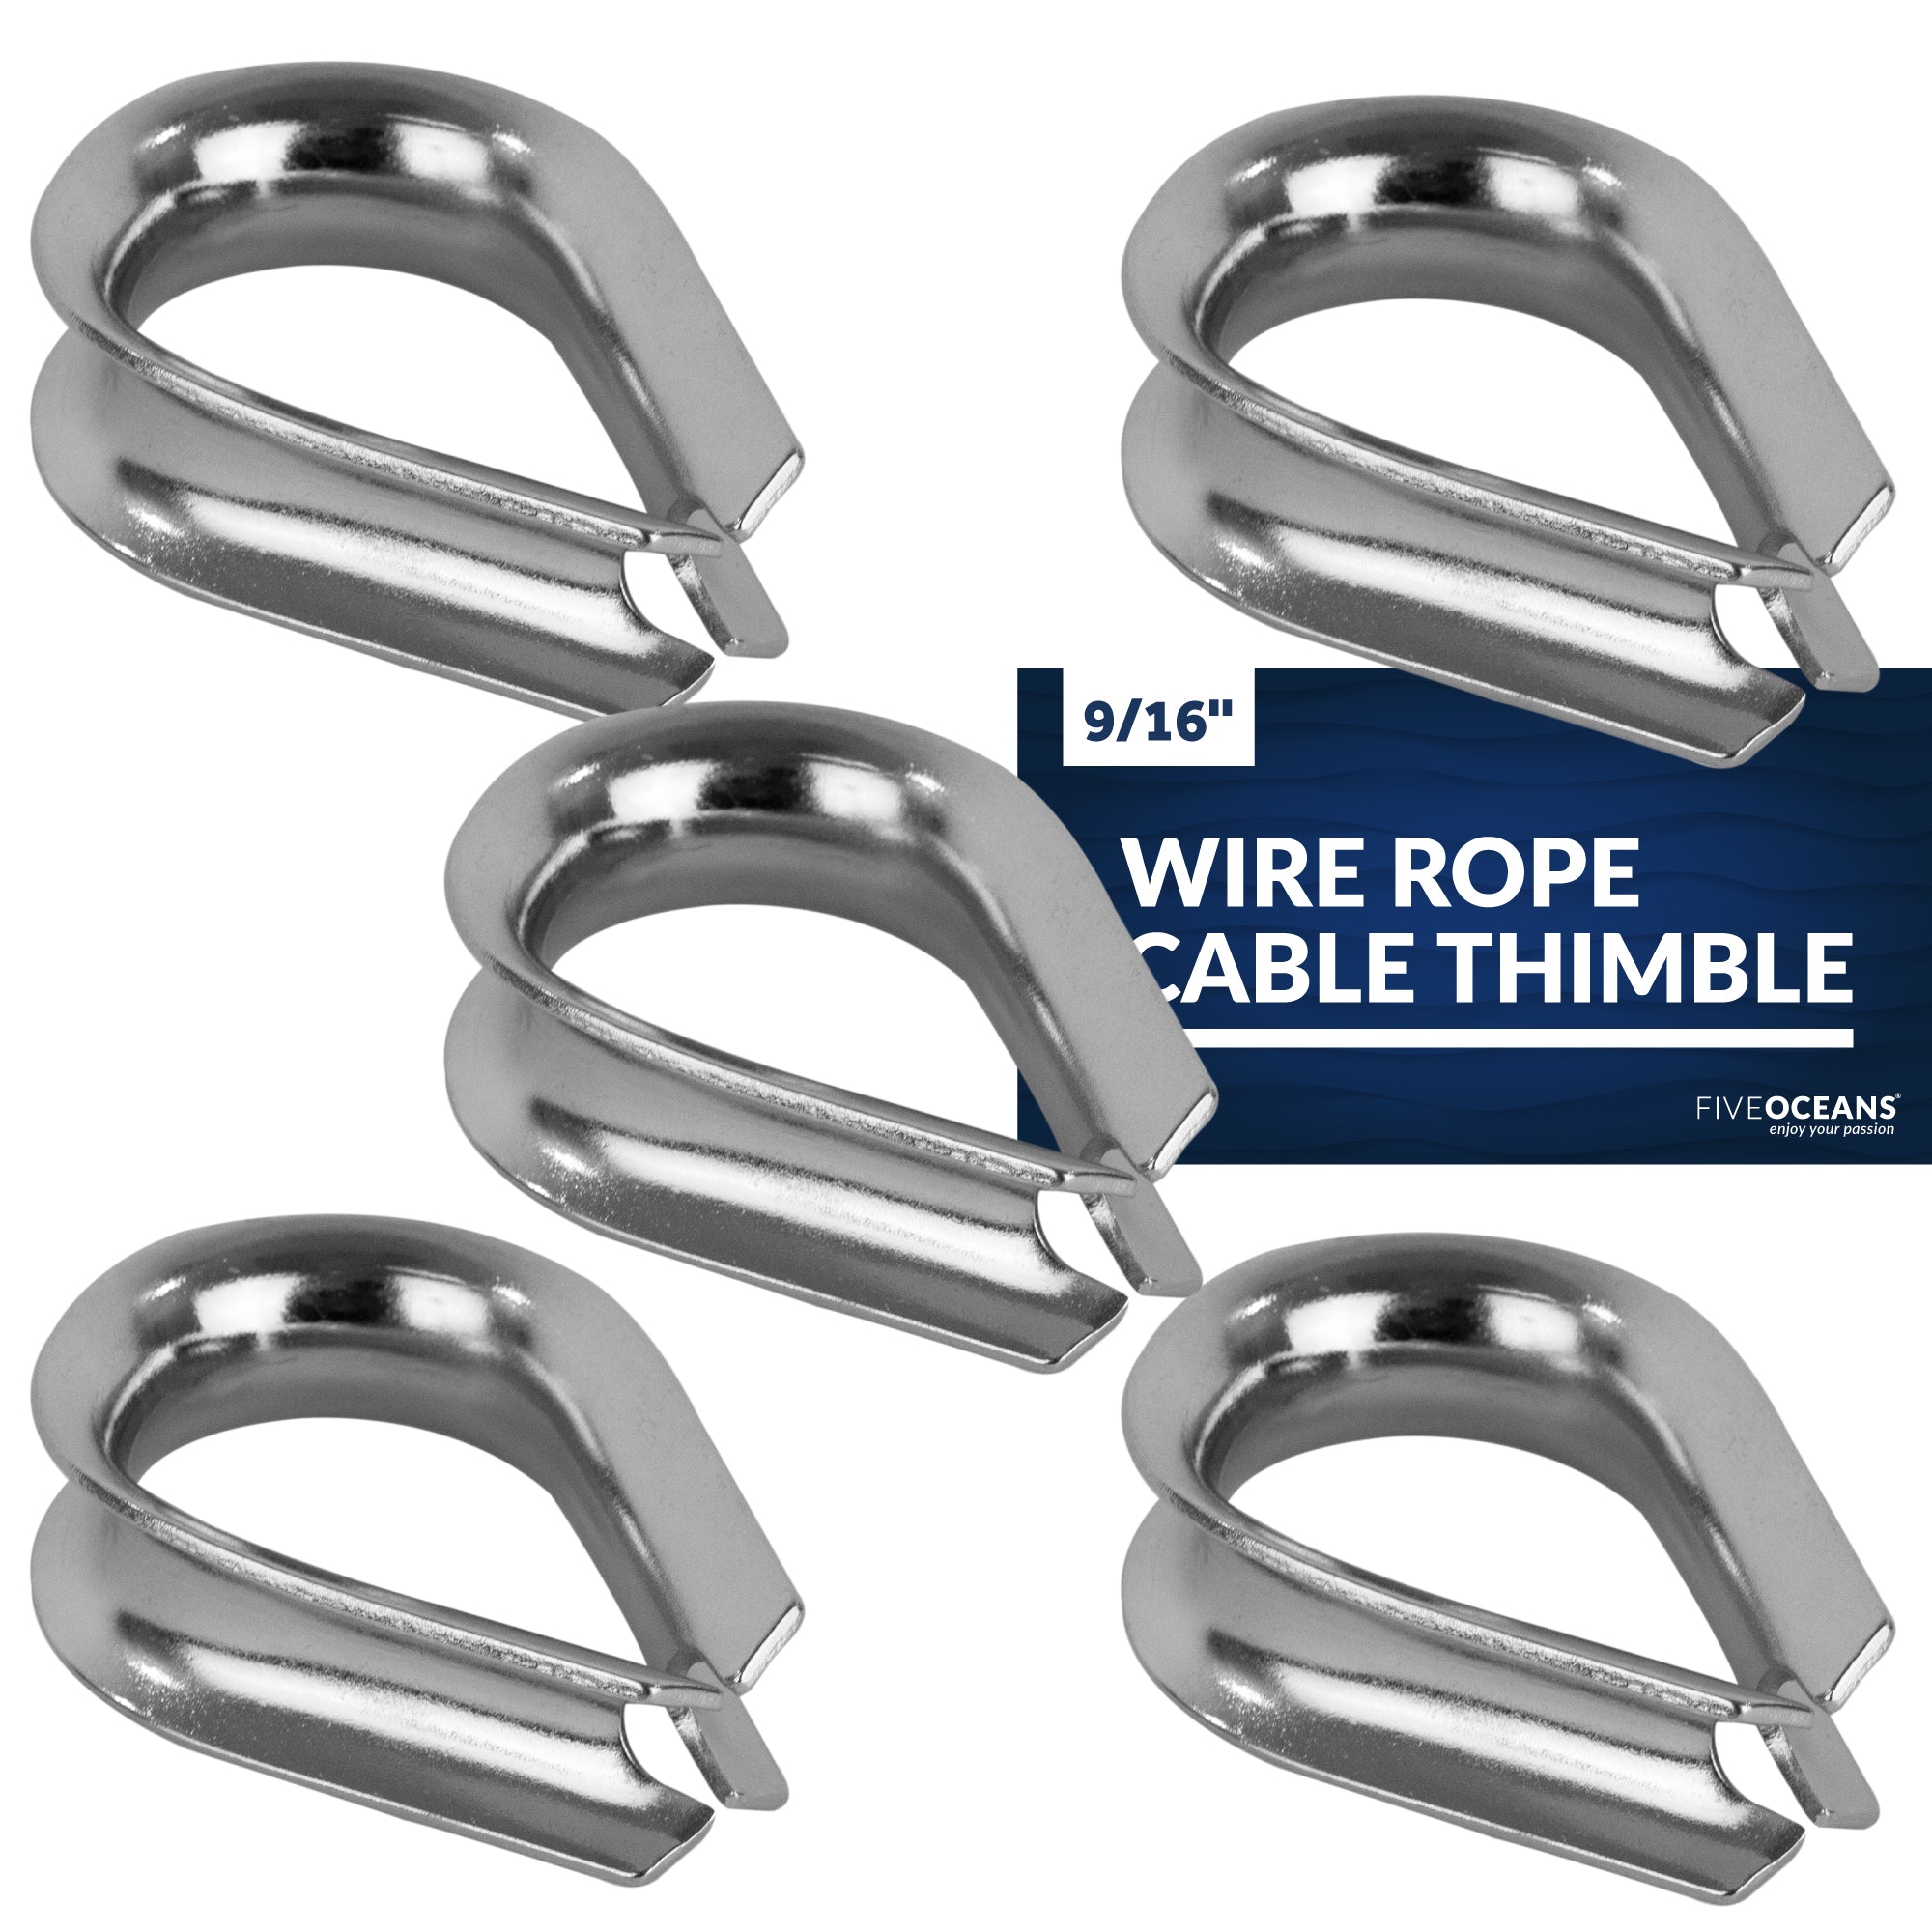 Thimble for 9/16"Wire Rope Cable, Stainless Steel - 5-Pack - FO1446-M5